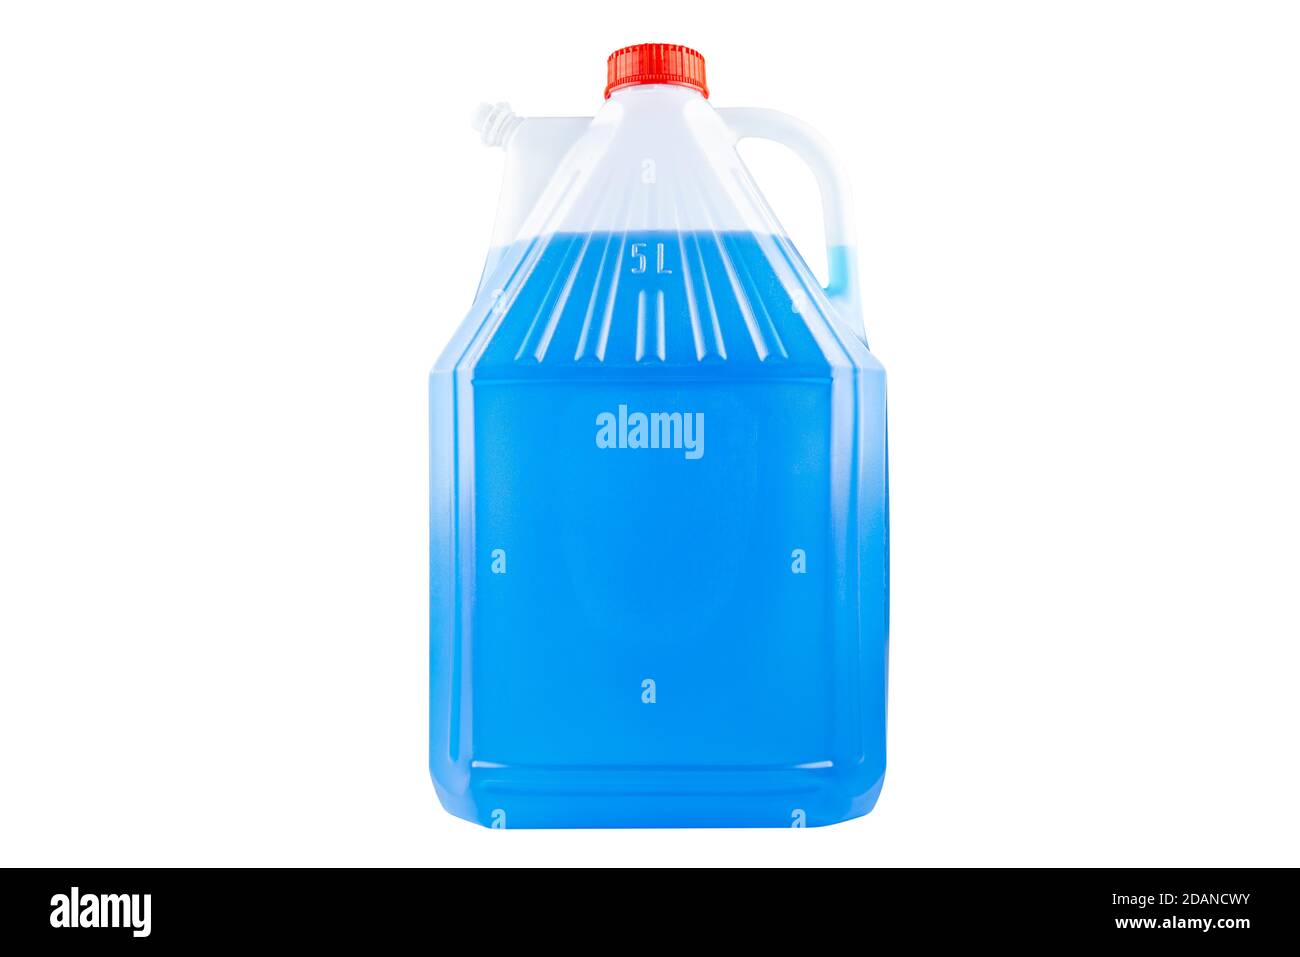 Winter blue windshield washer fluid in a five liter bottle, closed with a red cap, isolated on a white background with a clipping path. Stock Photo